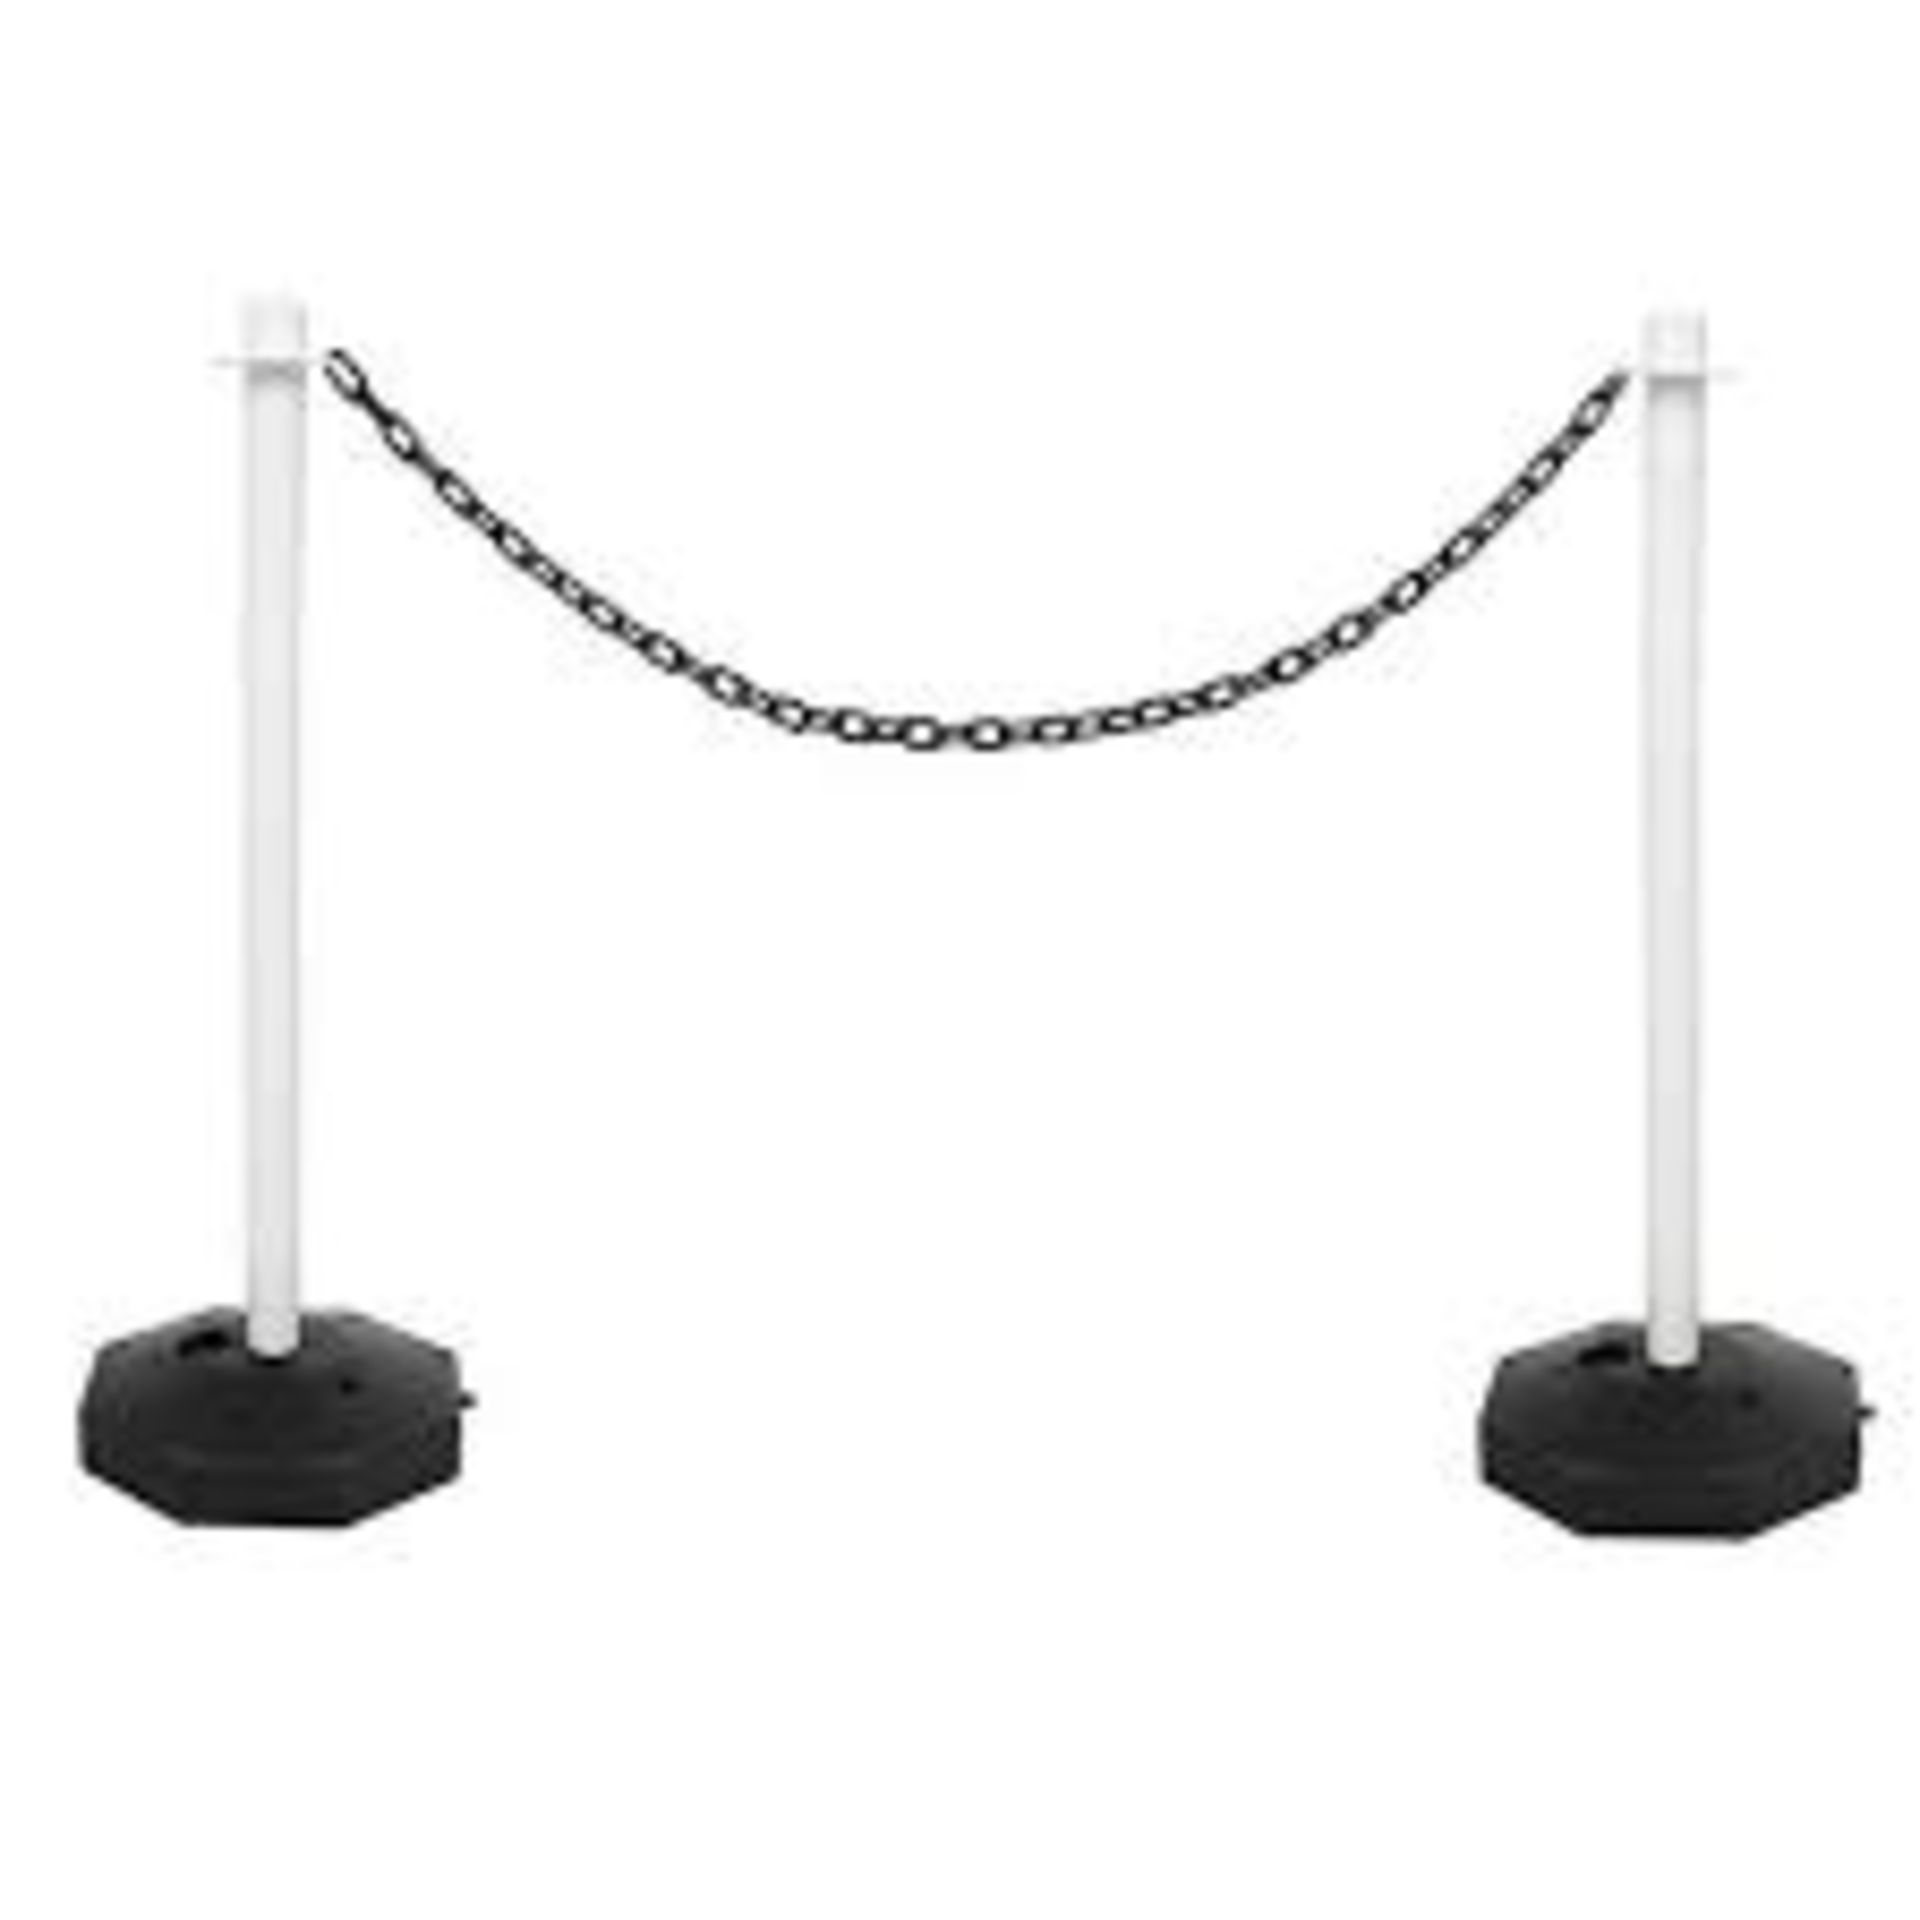 True Products Support Posts & Plastic Chain Barrier Set - R13a.10.